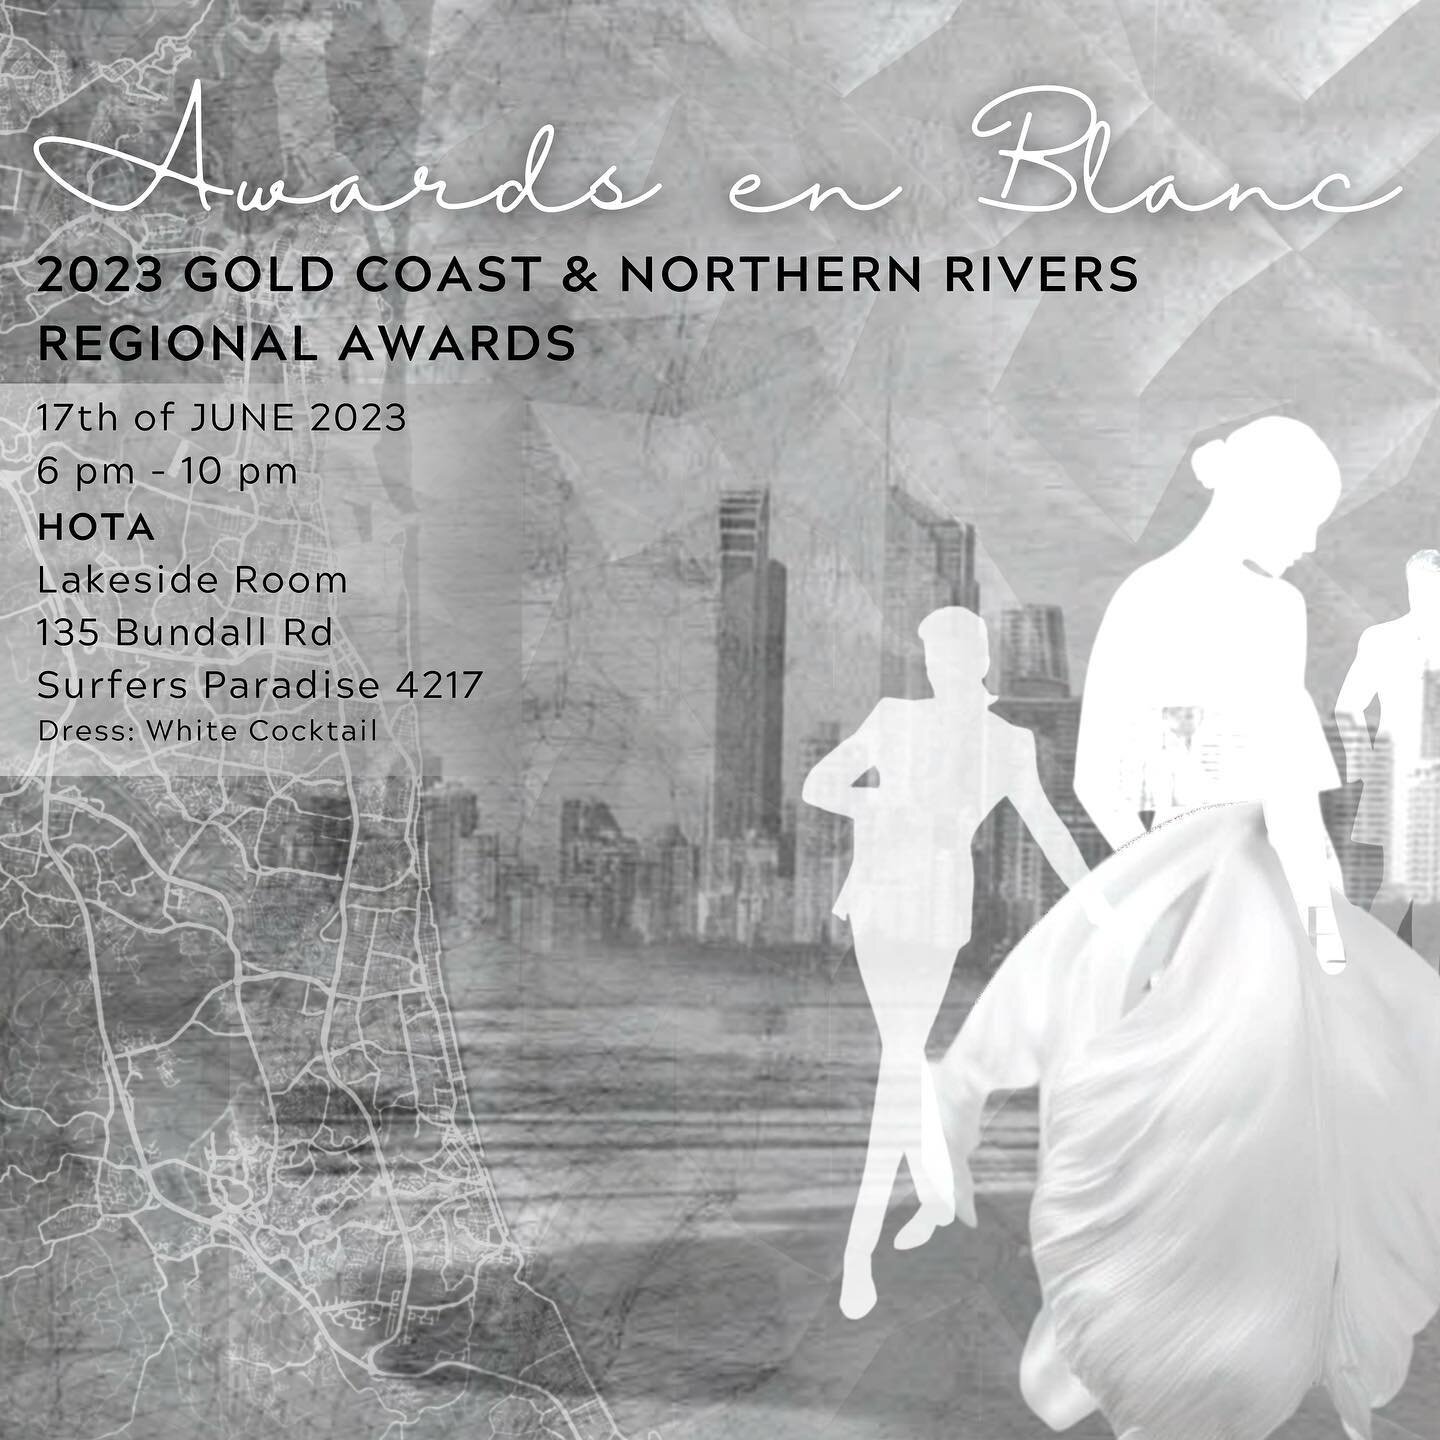 2023 Gold Coast &amp; Northern Rivers Regional Awards are on this Saturday night @hotagc !!
Celebrating 40 Years!
Ticket&rsquo;s still available link to register is in Bio. See you there!!
@institute_architects_qld